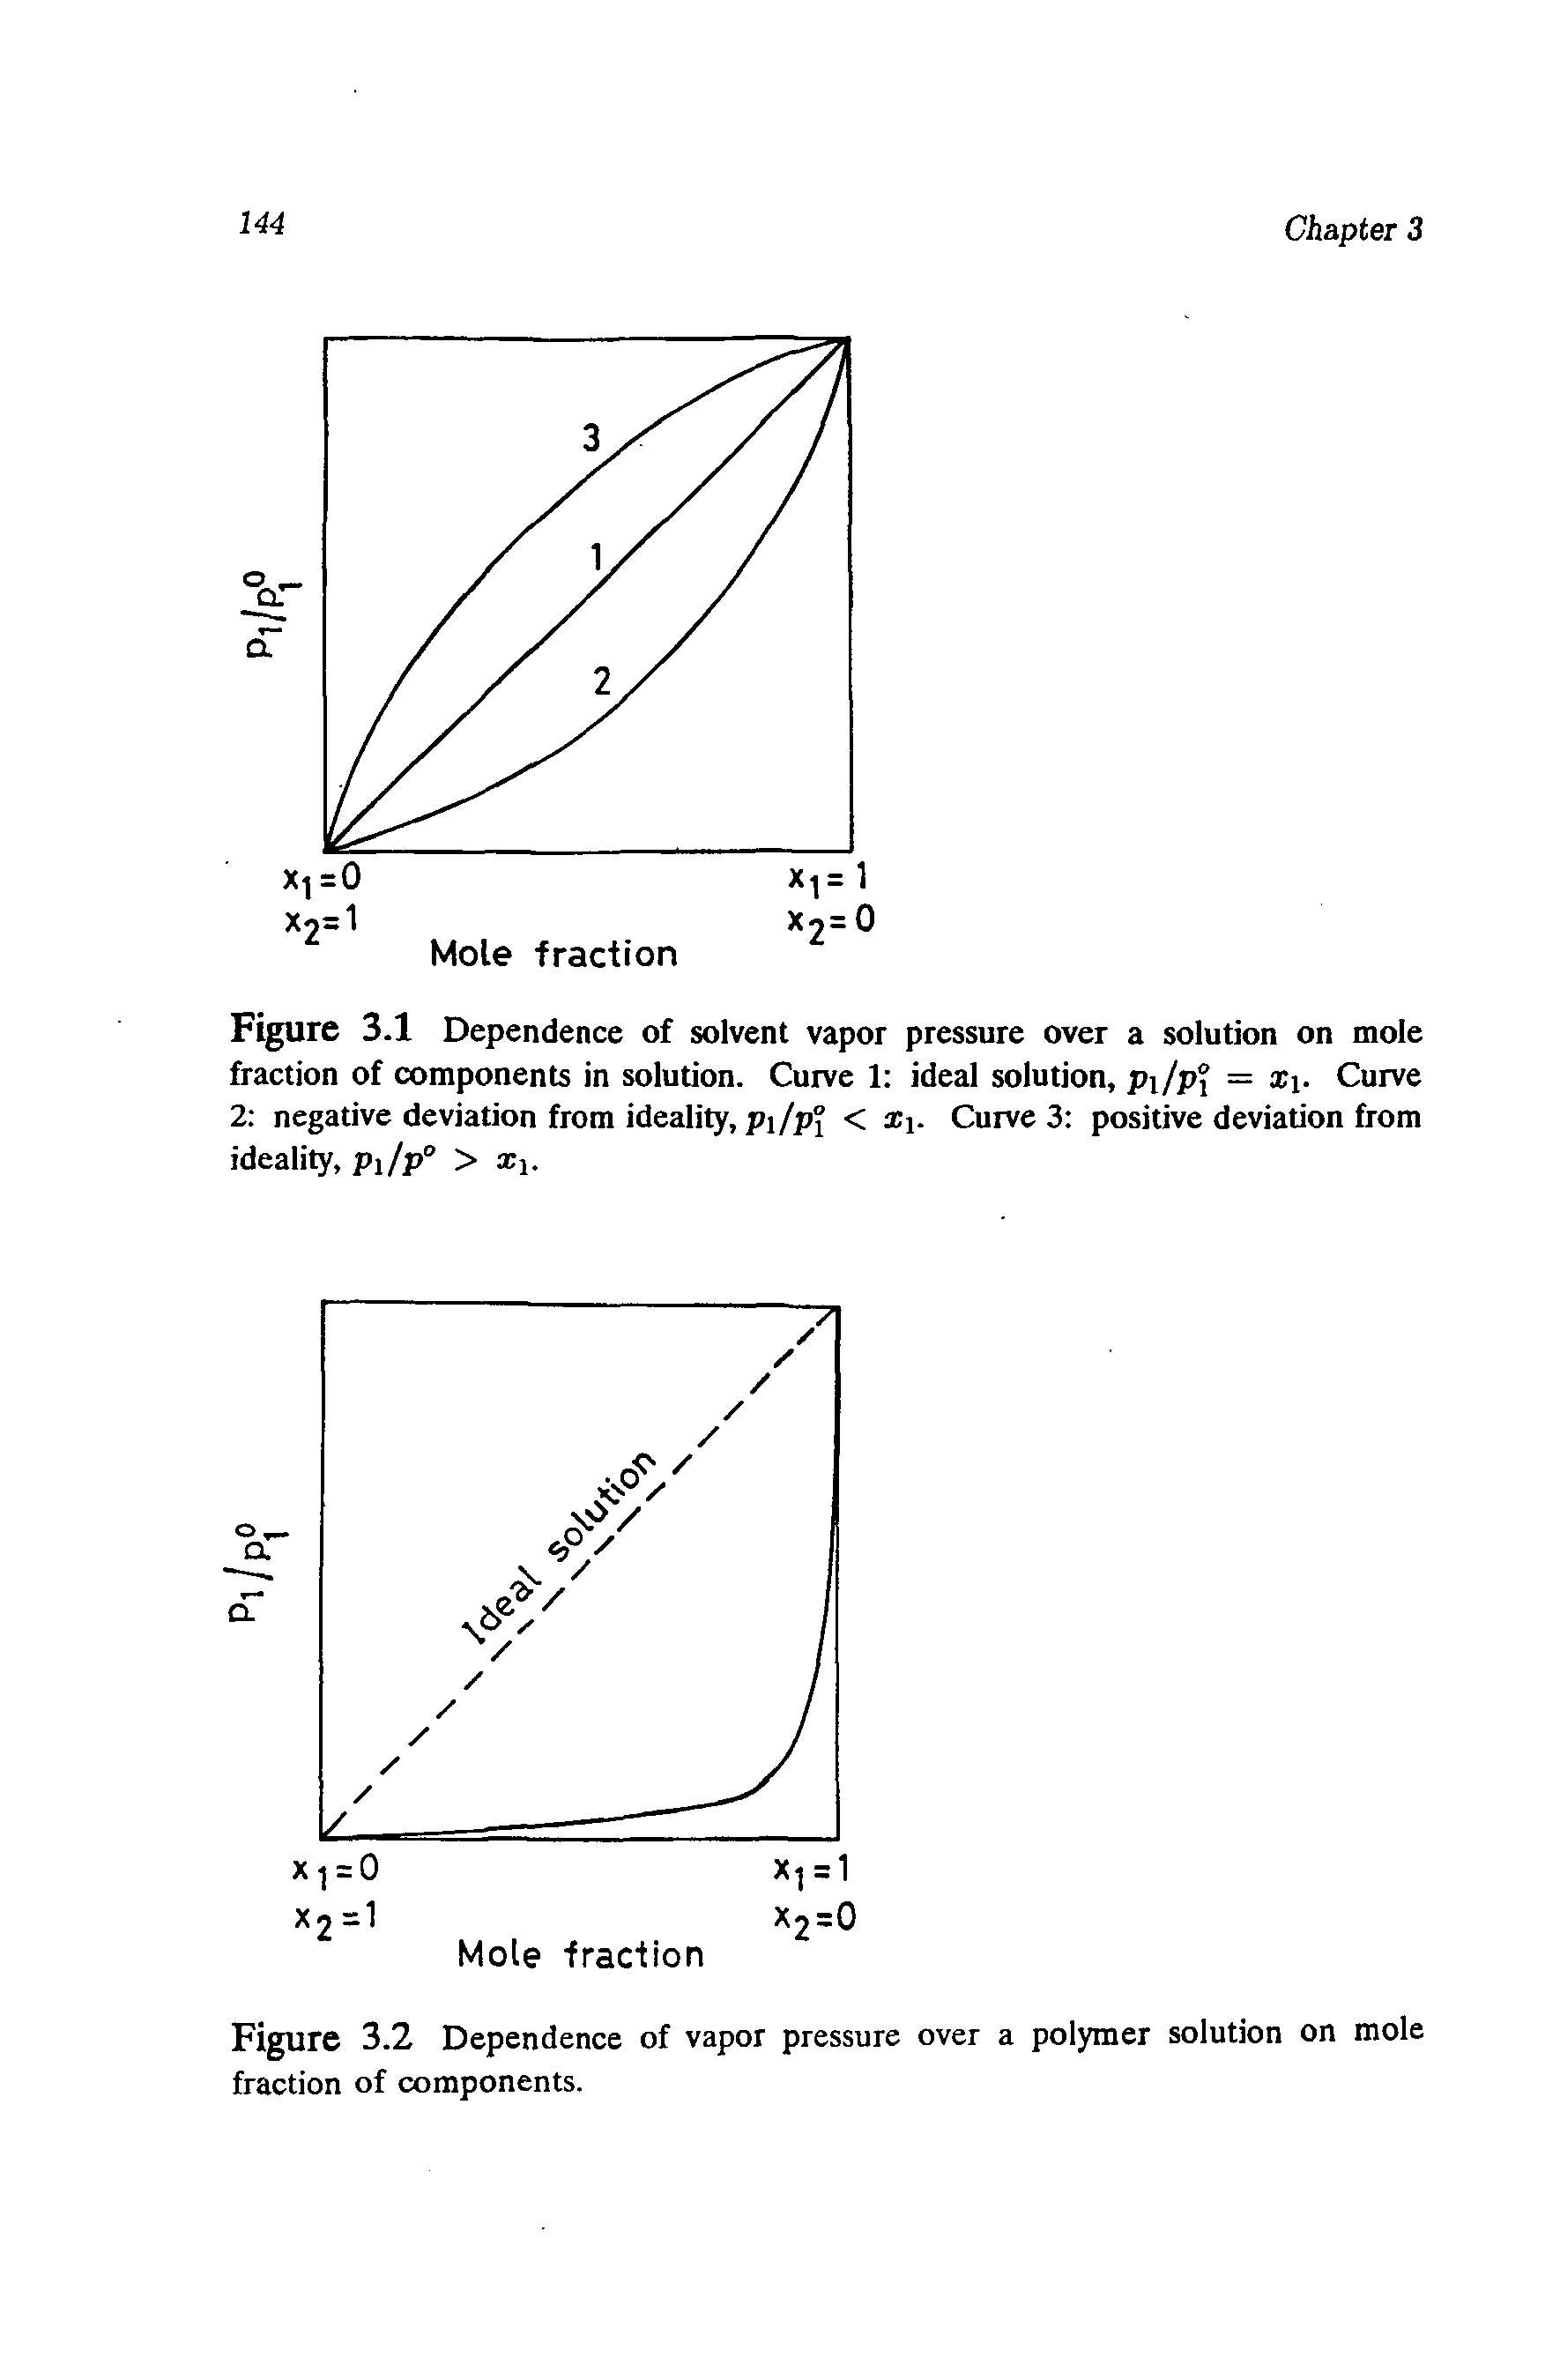 Figure 3.1 Dependence of solvent vapor pressure over a solution on mole fraction of components in solution. Curve 1 ideal solution, pi/pi = X. Curve 2 negative deviation from ideality, Pi/pj < Xi- Curve 3 positive deviation from ideality, pi/p° > Xi.